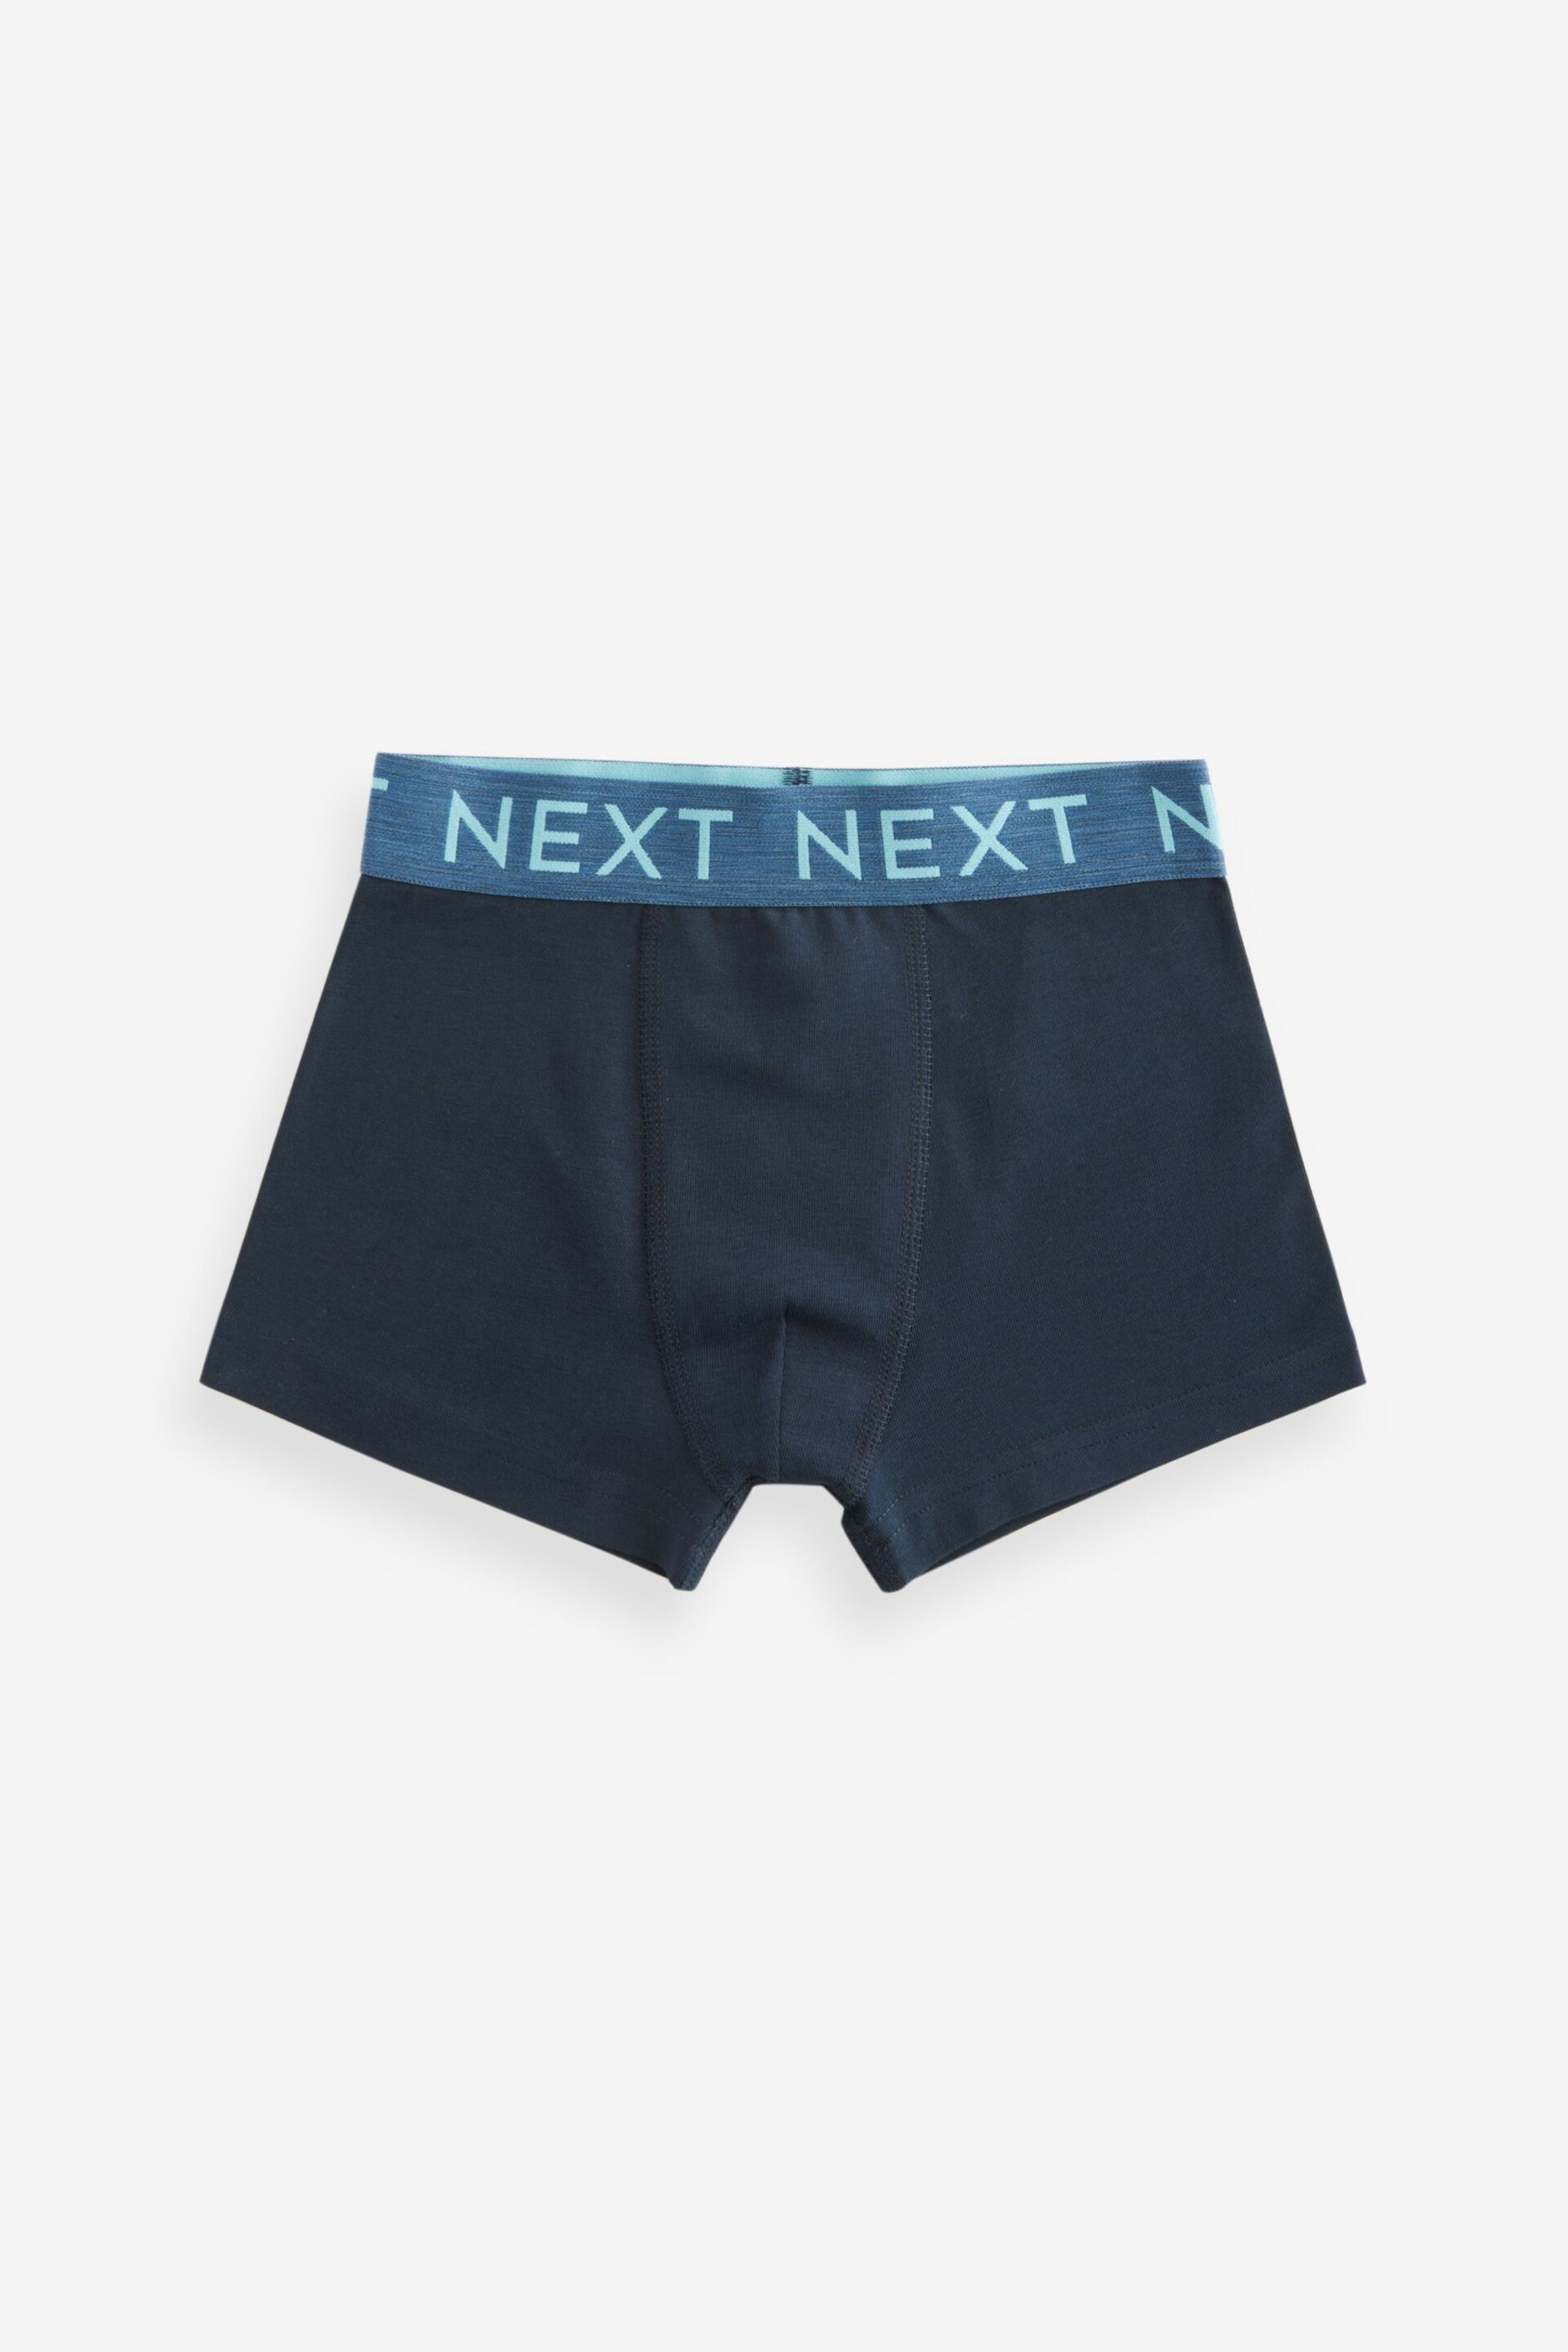 Blue Trunks 10 Pack (2-16yrs) - Image 11 of 13